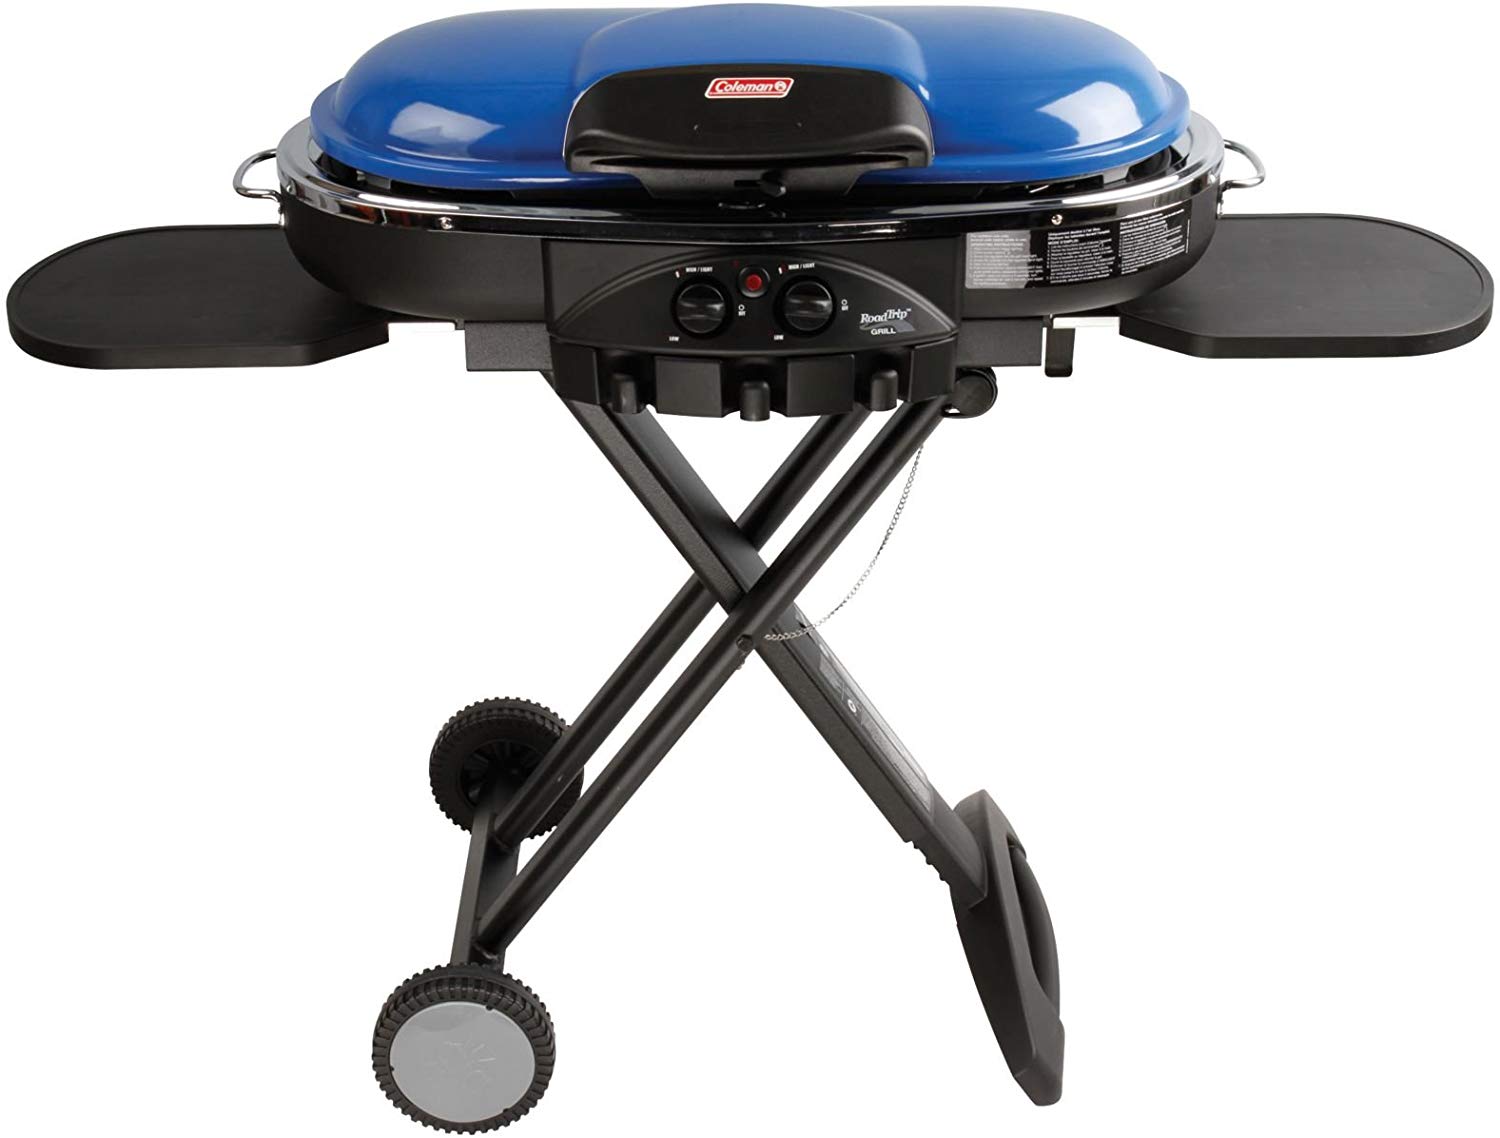 The Coleman Road Trip Gas Grill